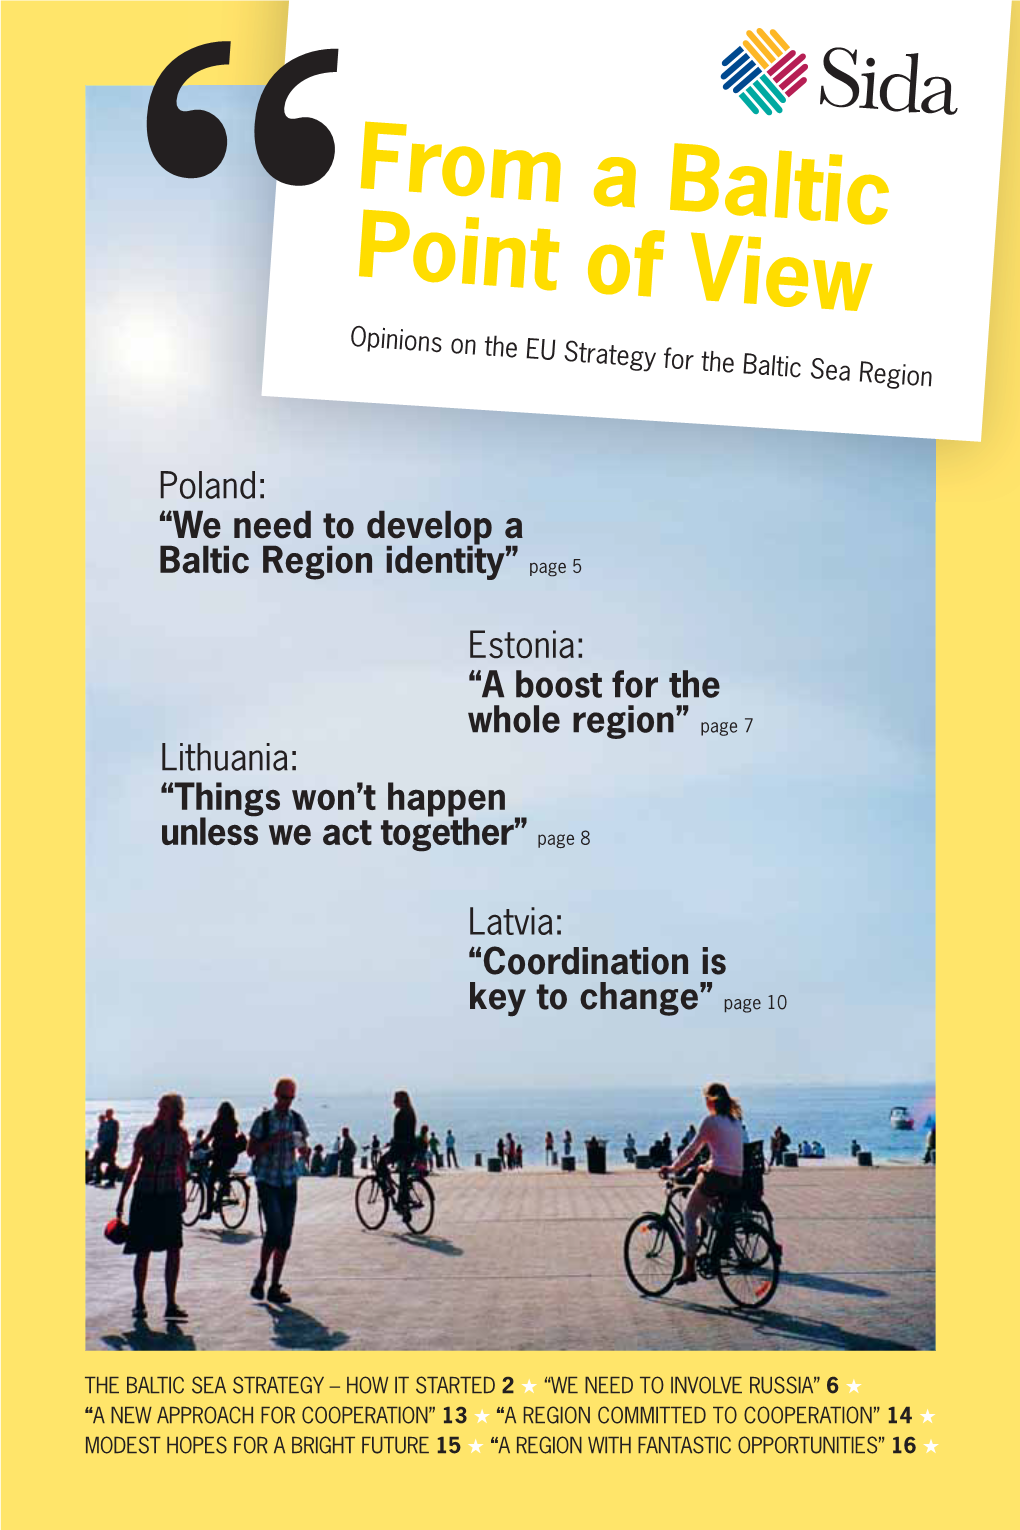 Why the Baltic Sea Strategy?